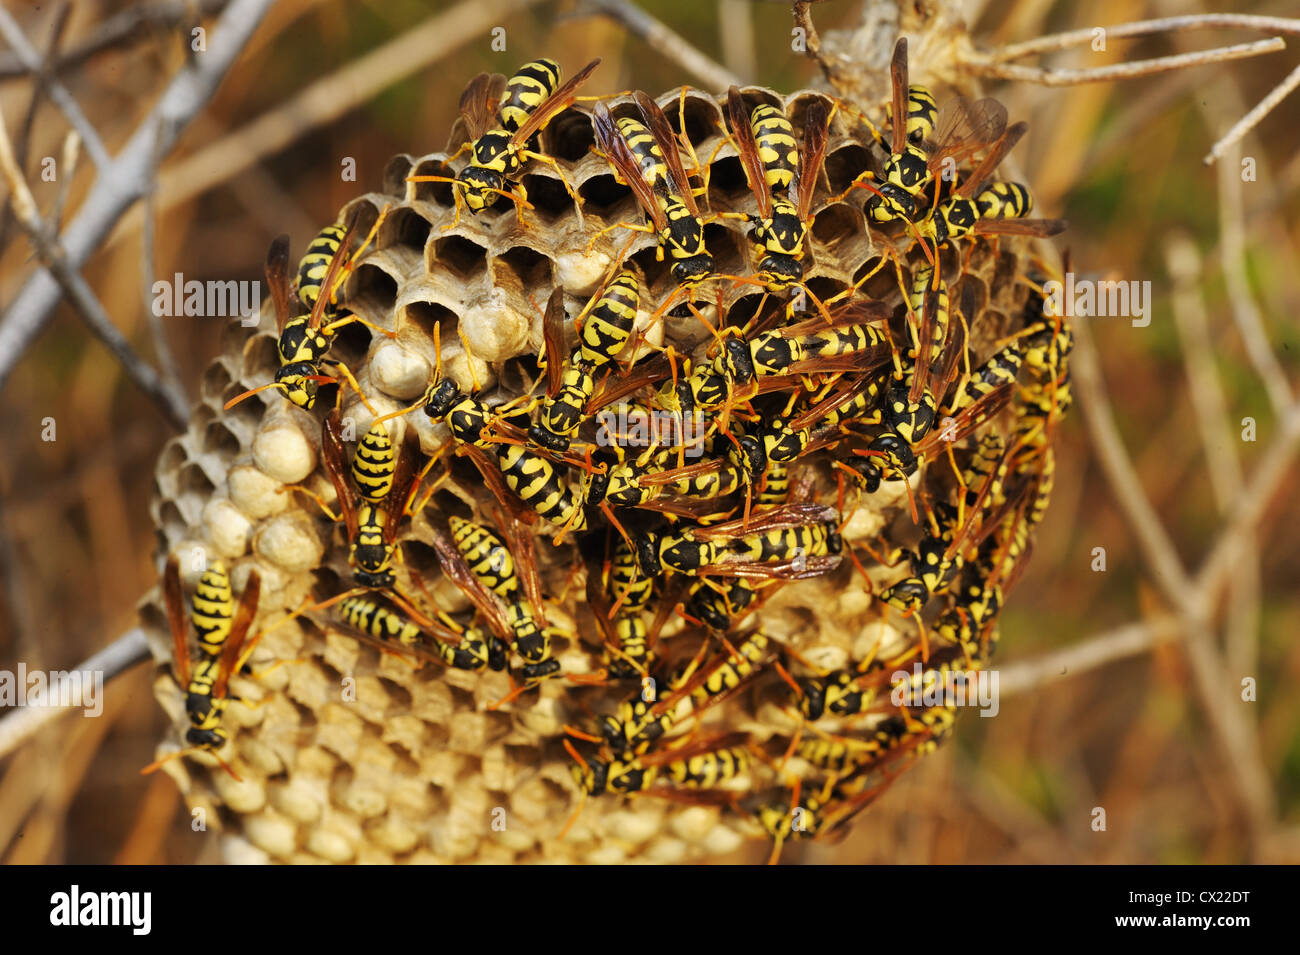 Wasps in the nest among the dry grass in Israel Stock Photo